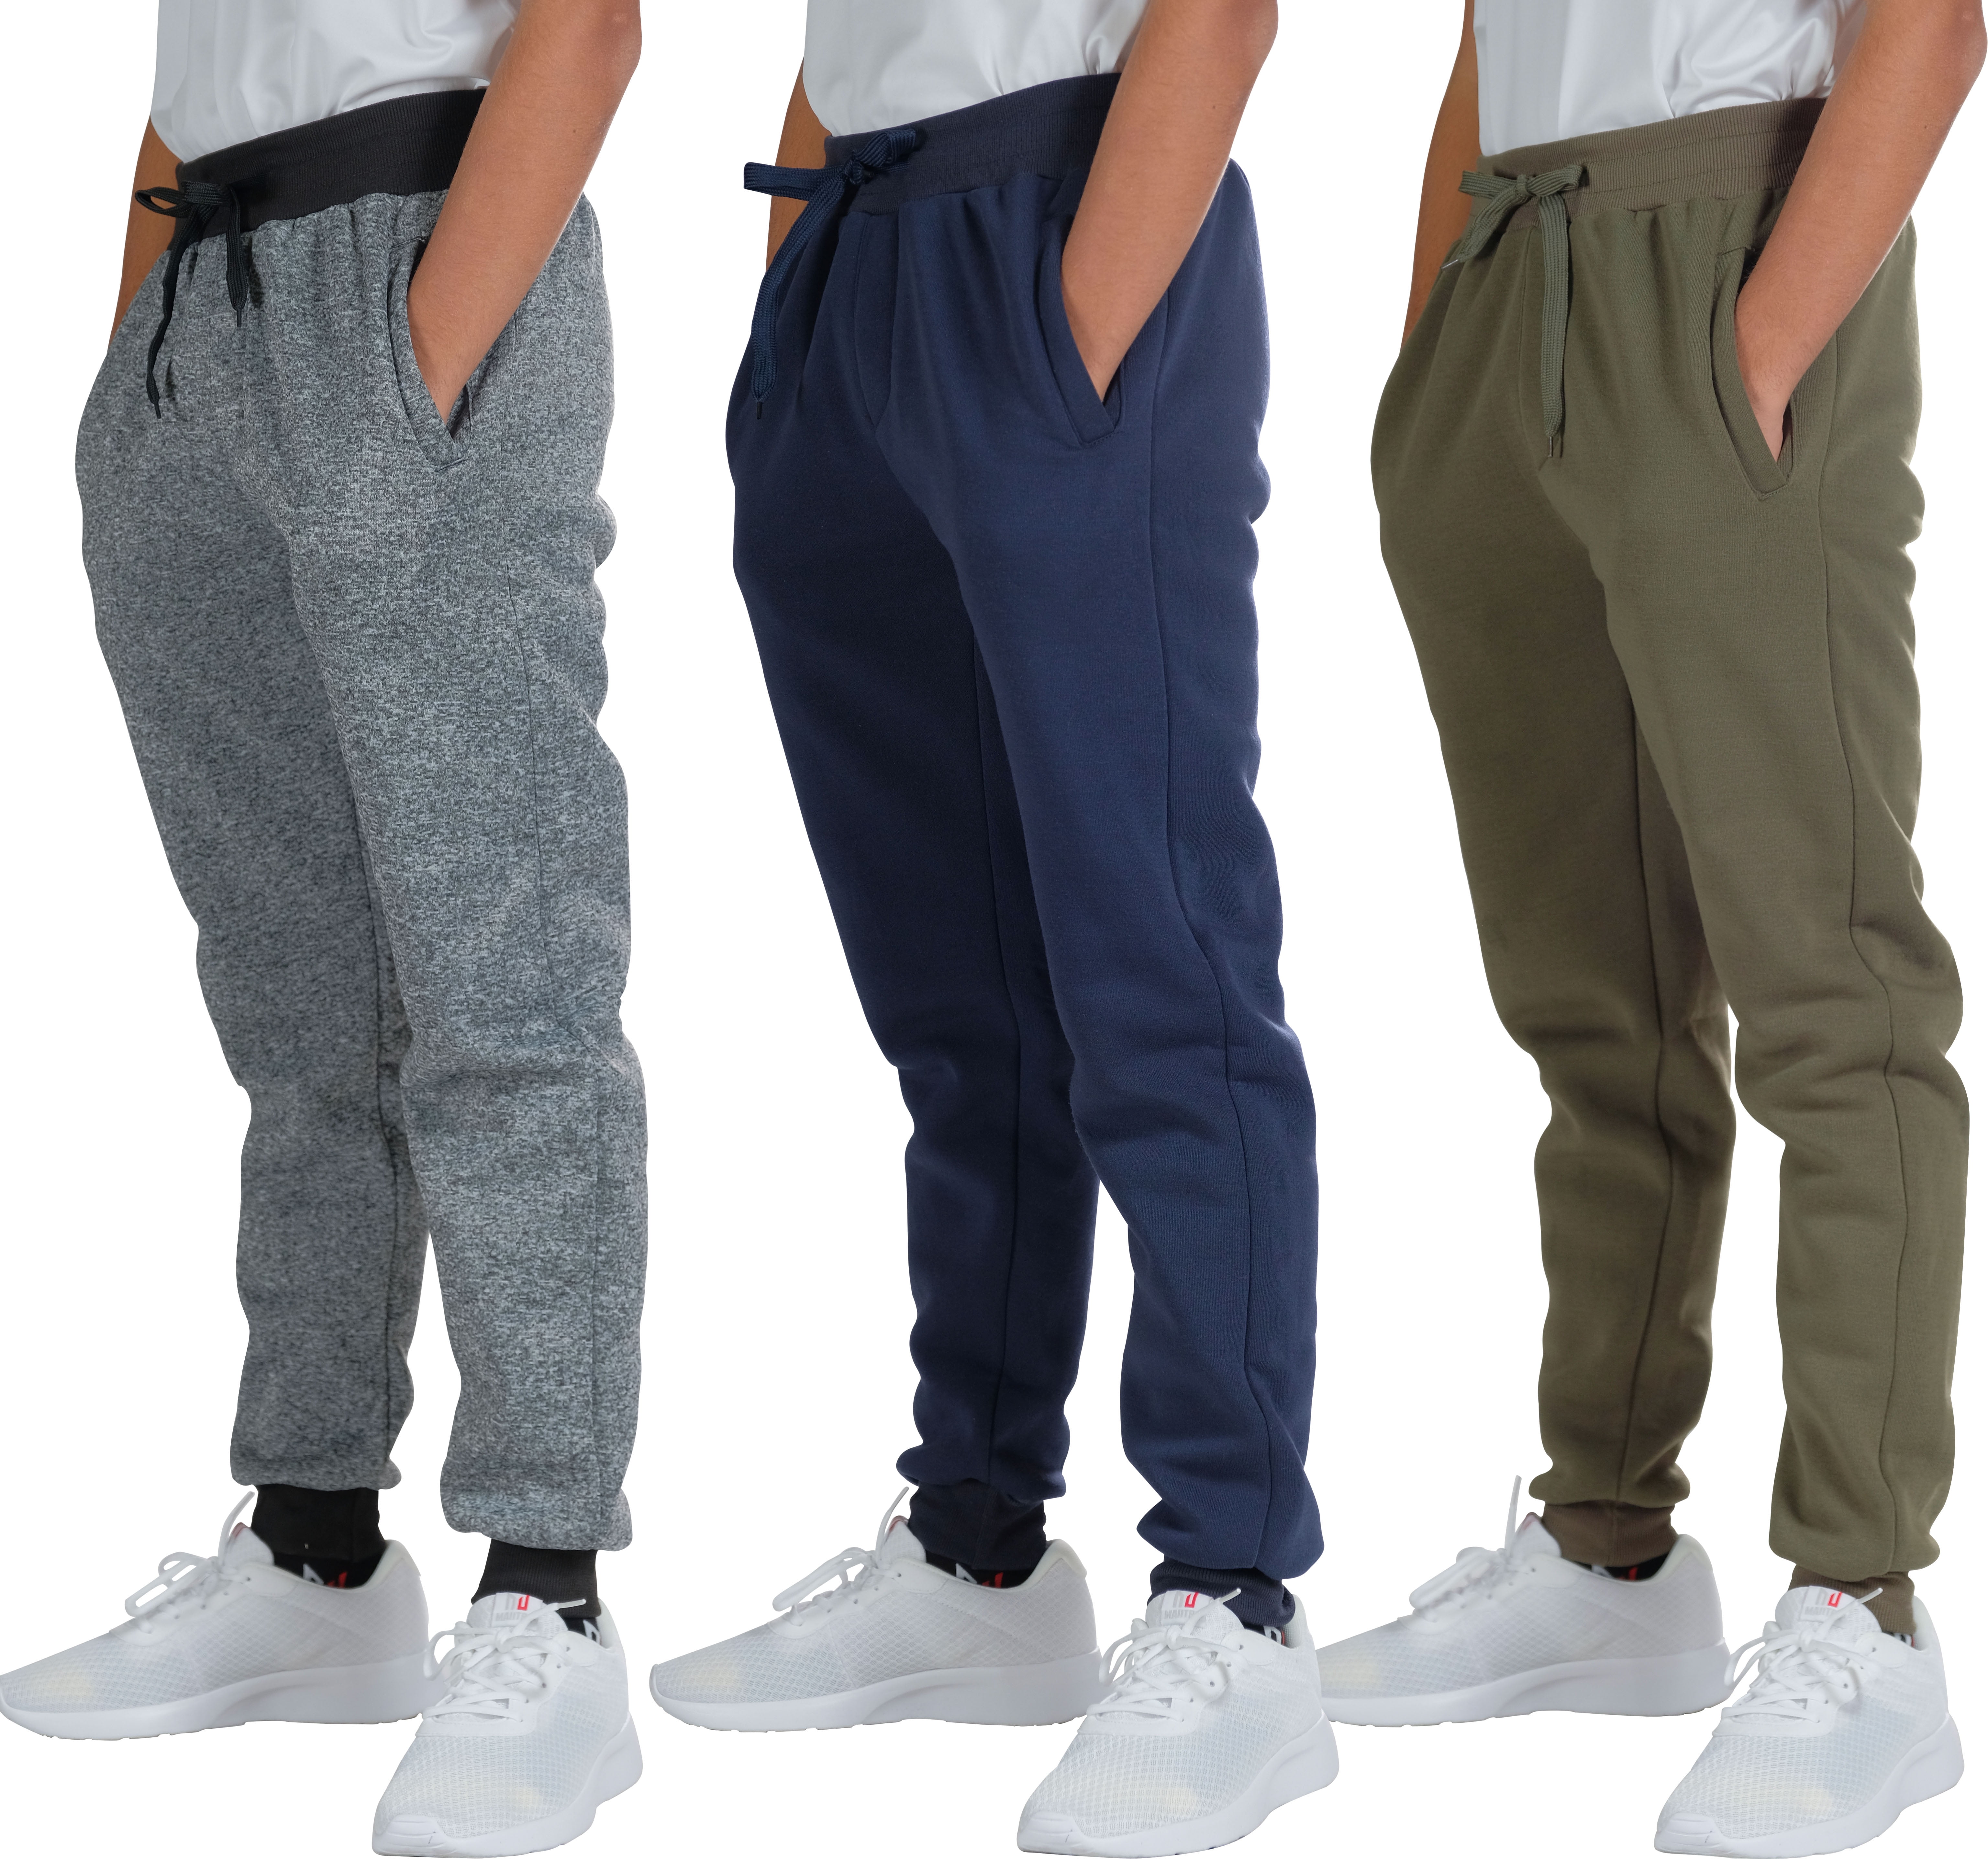 Real Essentials 3 Pack Boys Youth Active Athletic Soft Fleece Jogger Sweatpants